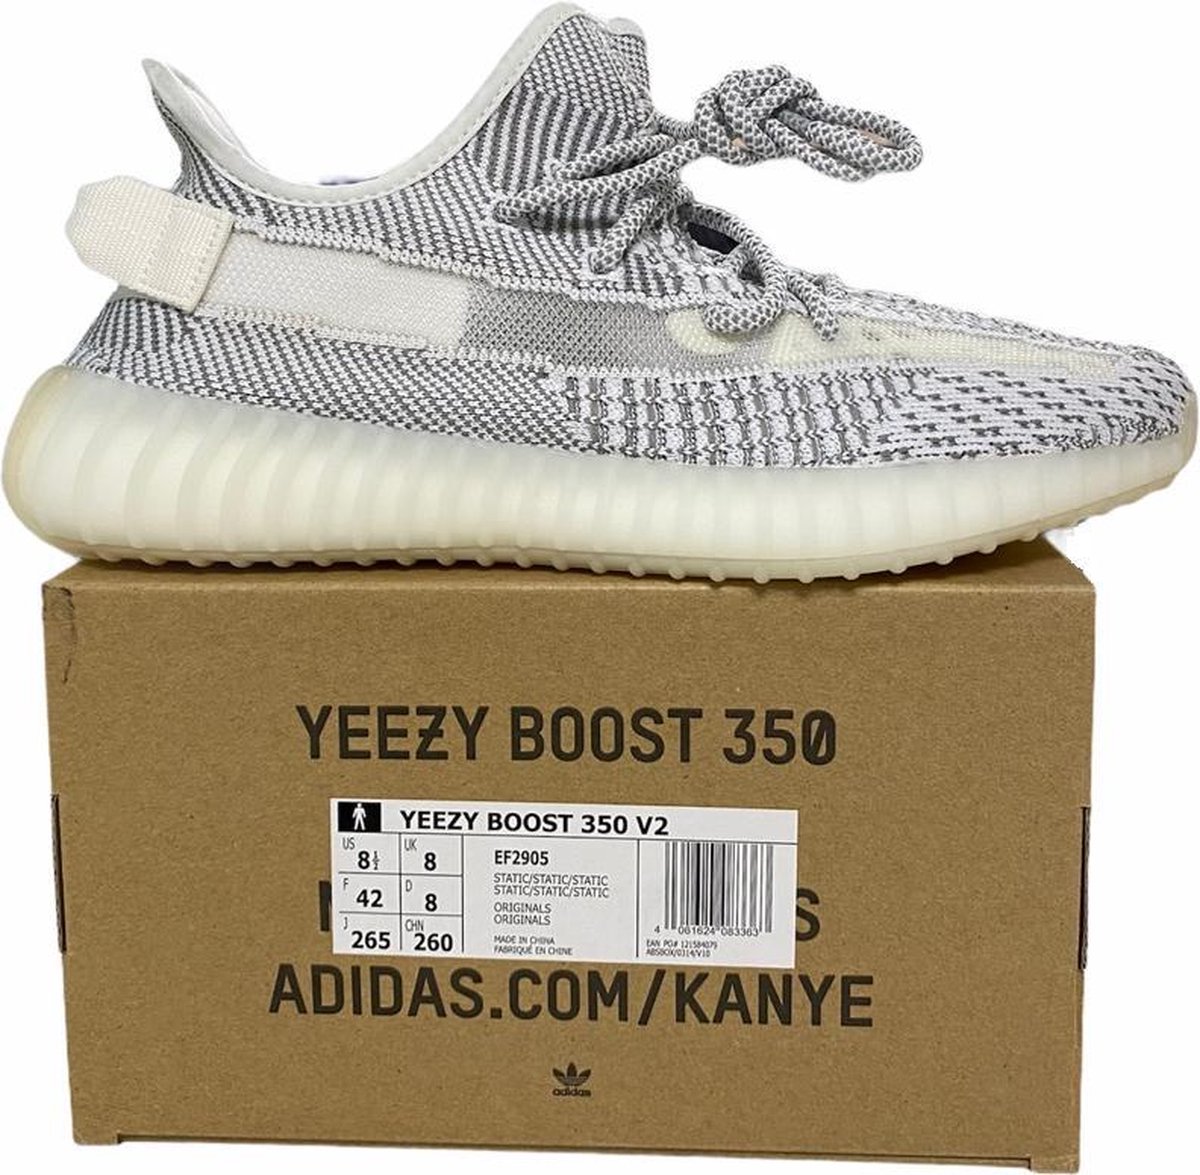 Adidas Yeezy Boost 350 V2 Static Non 